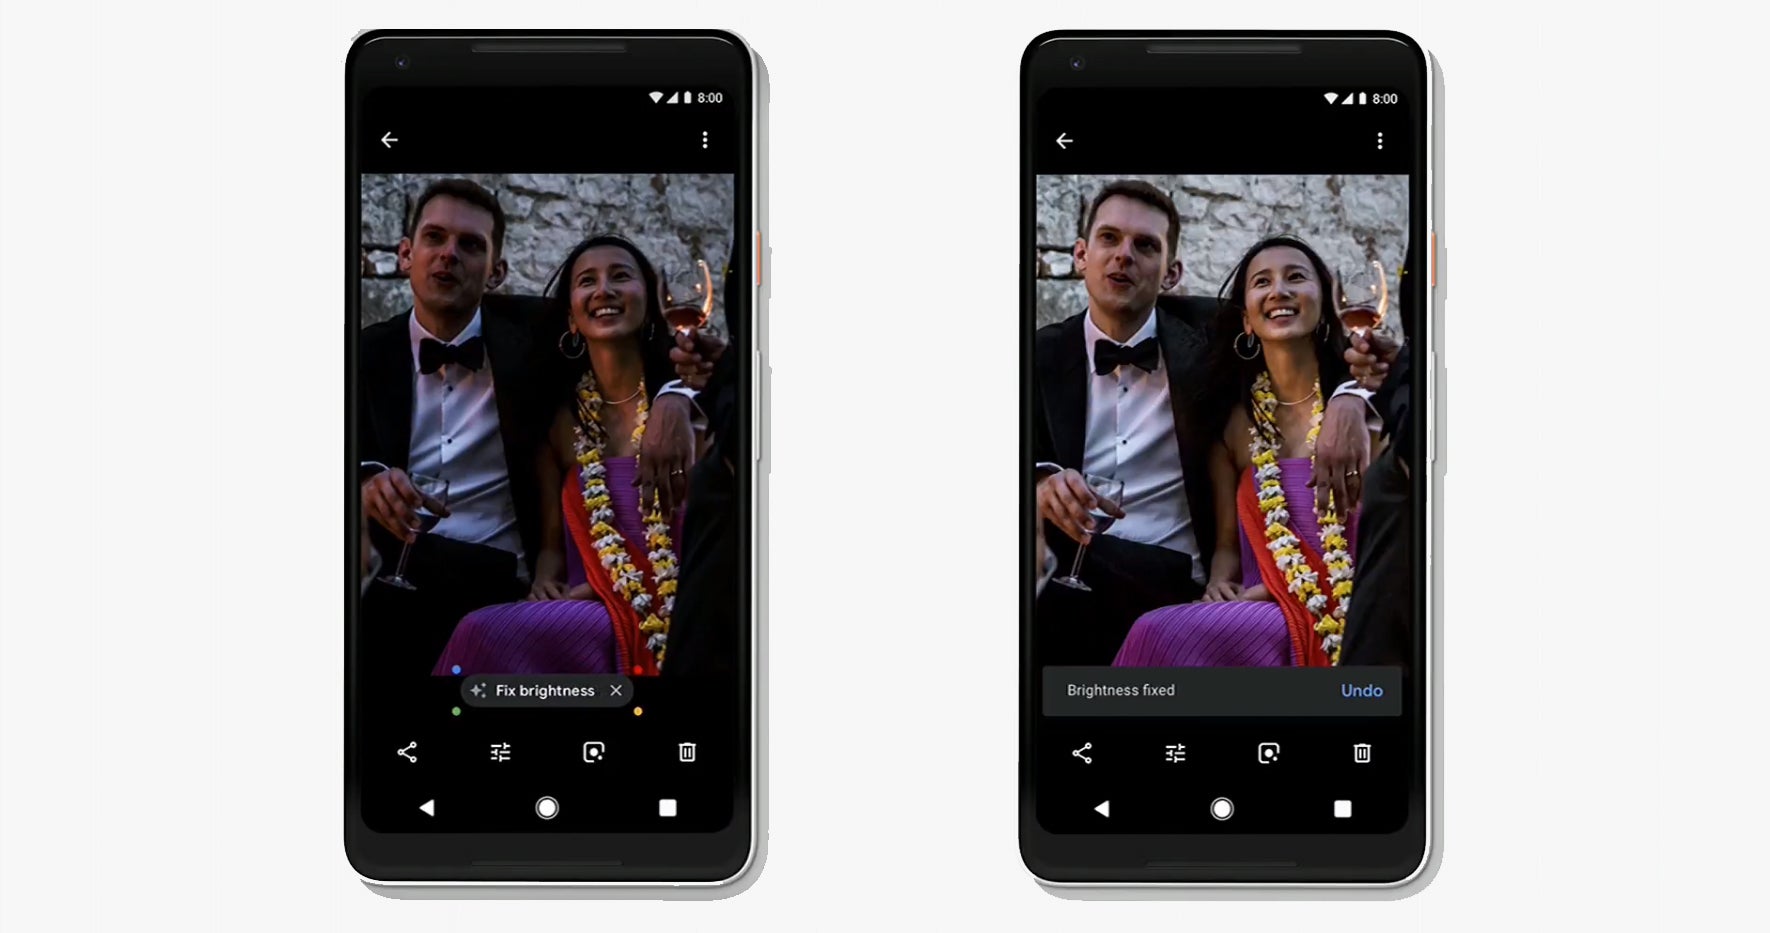 Massive Google Photos update incoming: a look at all the new features